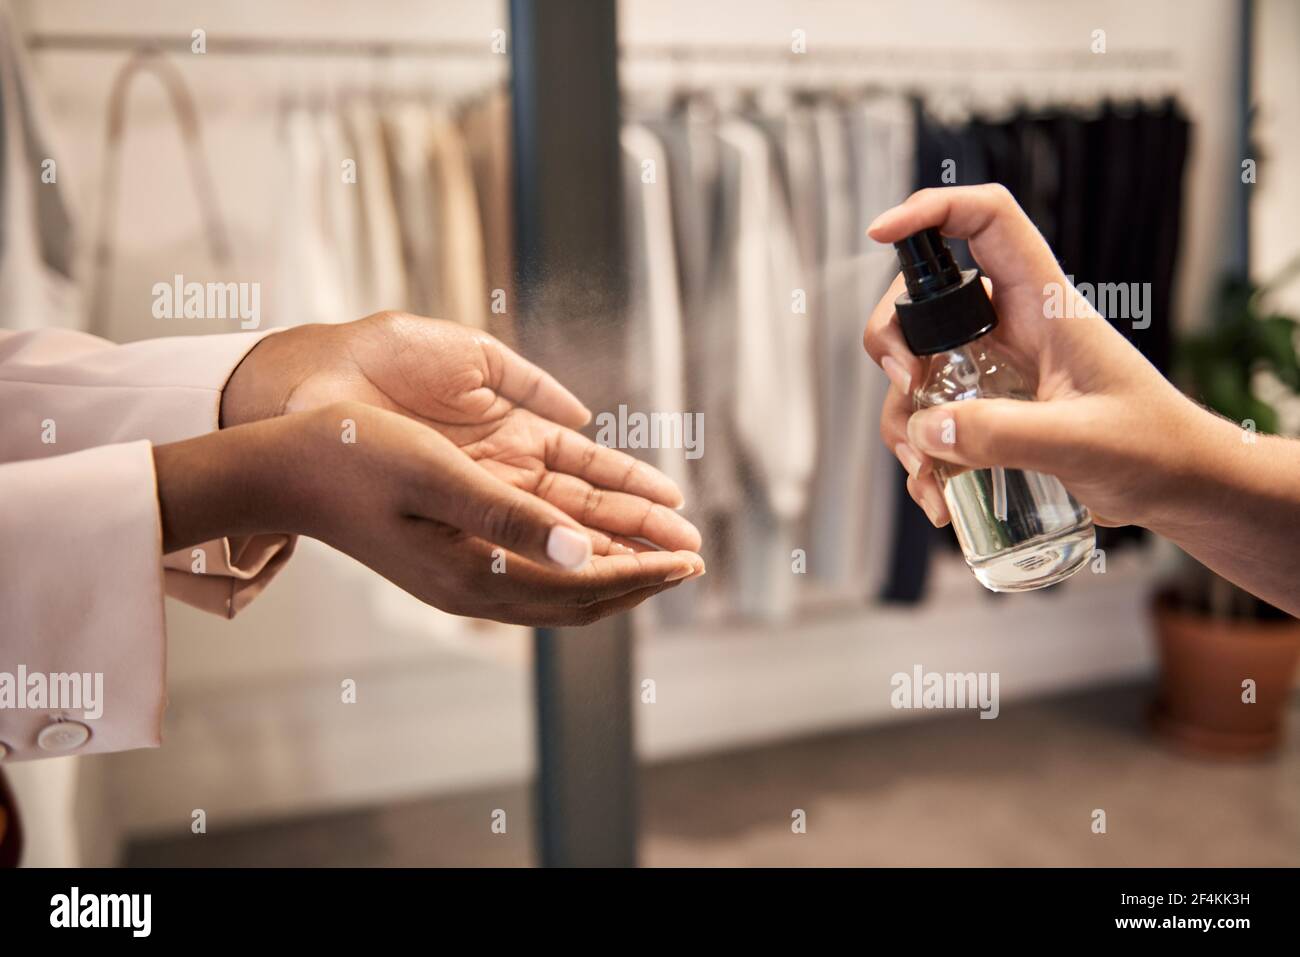 Shop assistant spraying sanitizer on a customer's hands Stock Photo